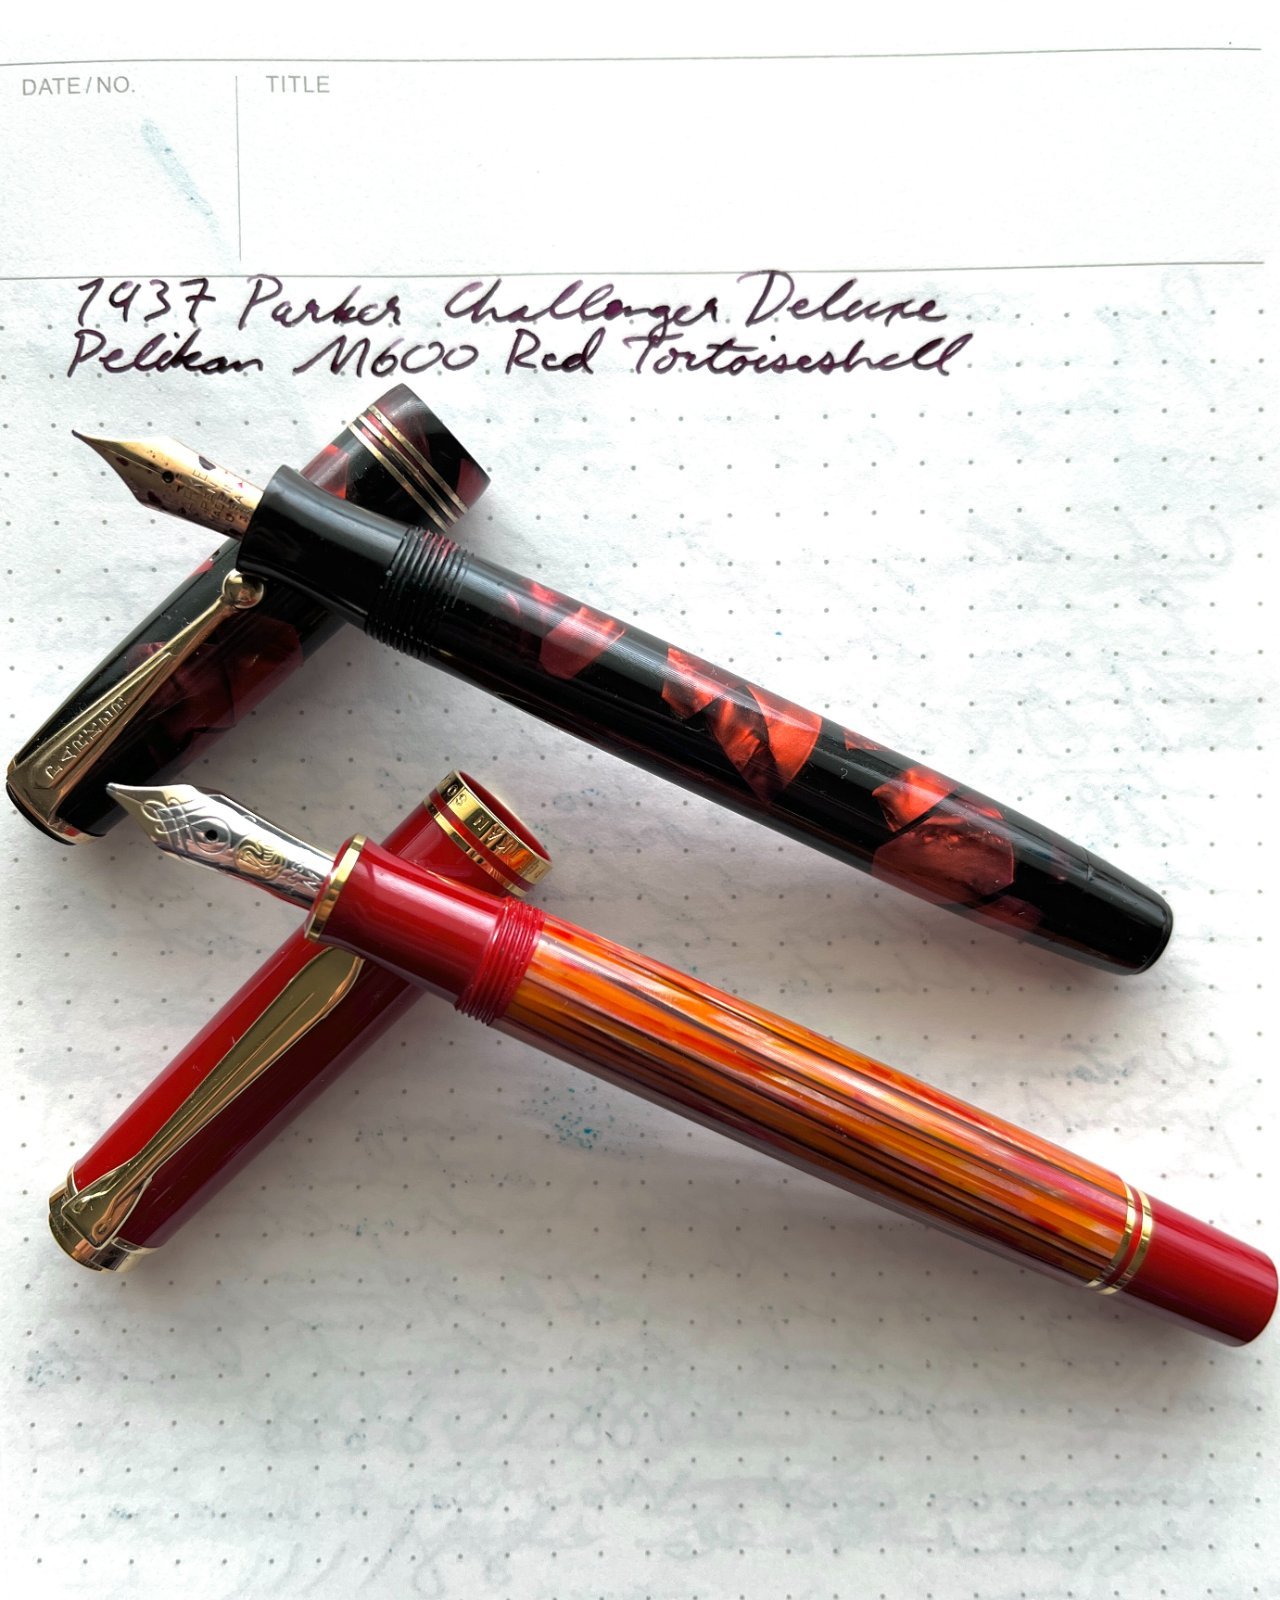 Red Pen Club- Show Me Your Red Pens! - Page 11 - Fountain & Dip Pens -  First Stop - The Fountain Pen Network